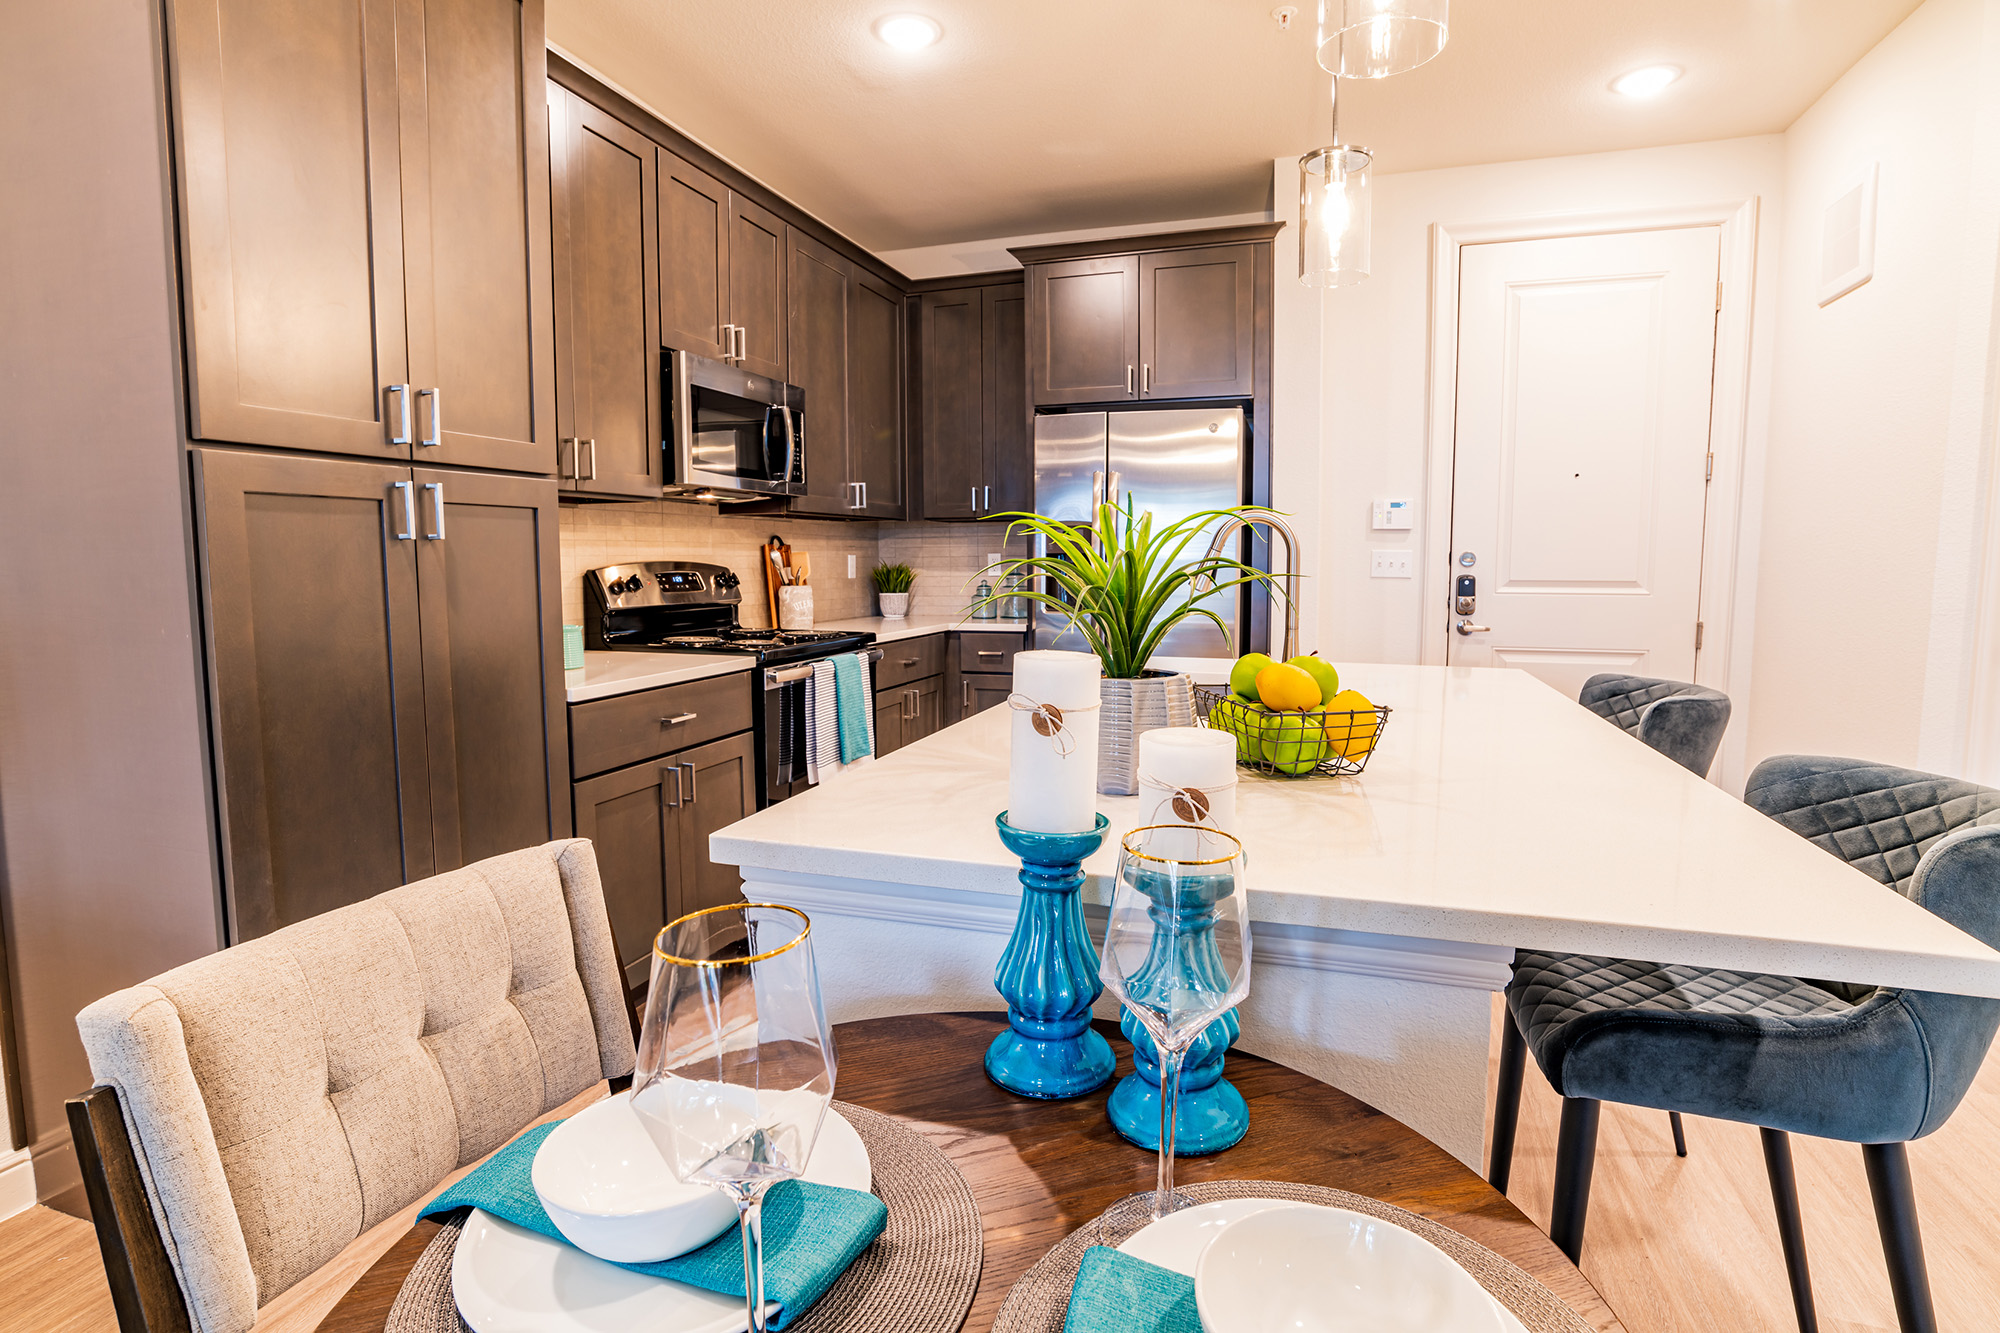 Kitchen and dining room at Asher by Caldwell Companies Brand New Houston Area Apartments